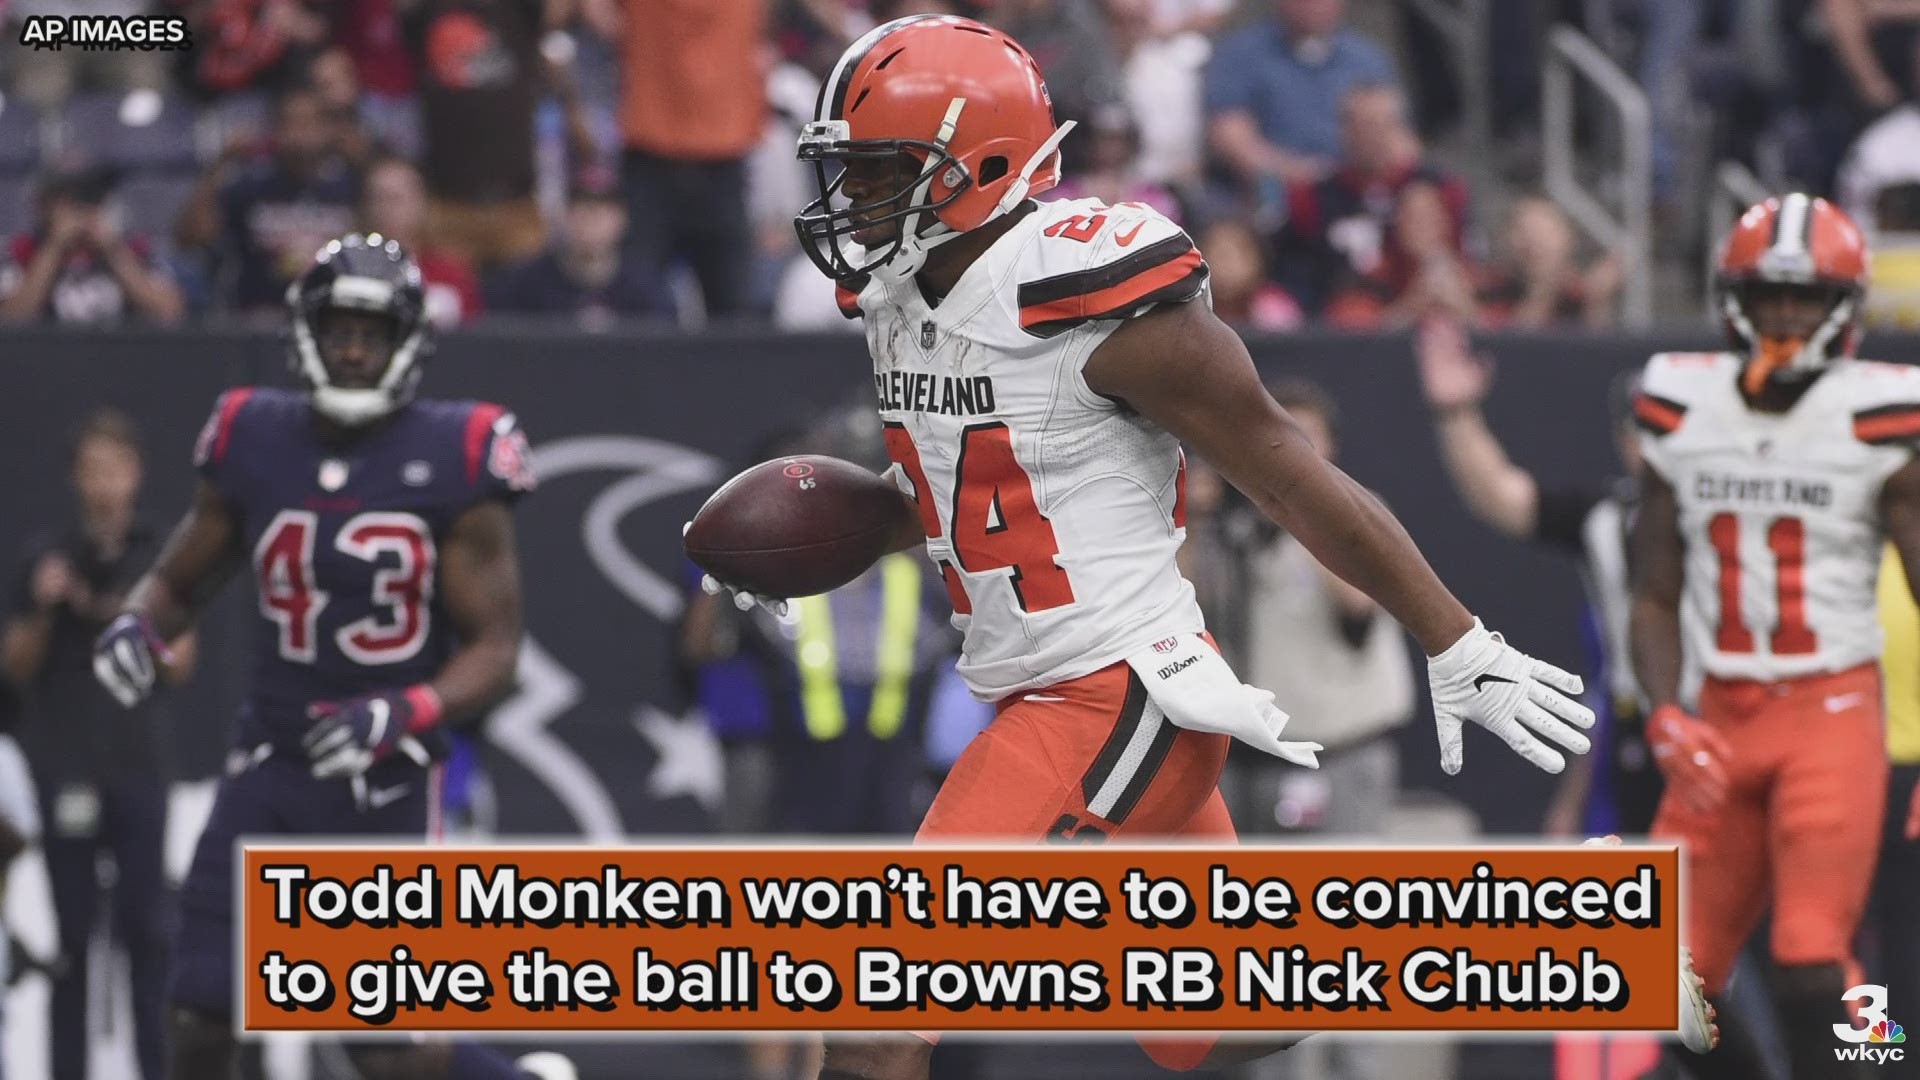 Known for his "throw to win" mindset, new Cleveland Browns offensive coordinator Todd Monken won’t have to be convinced to give ball to running back Nick Chubb.